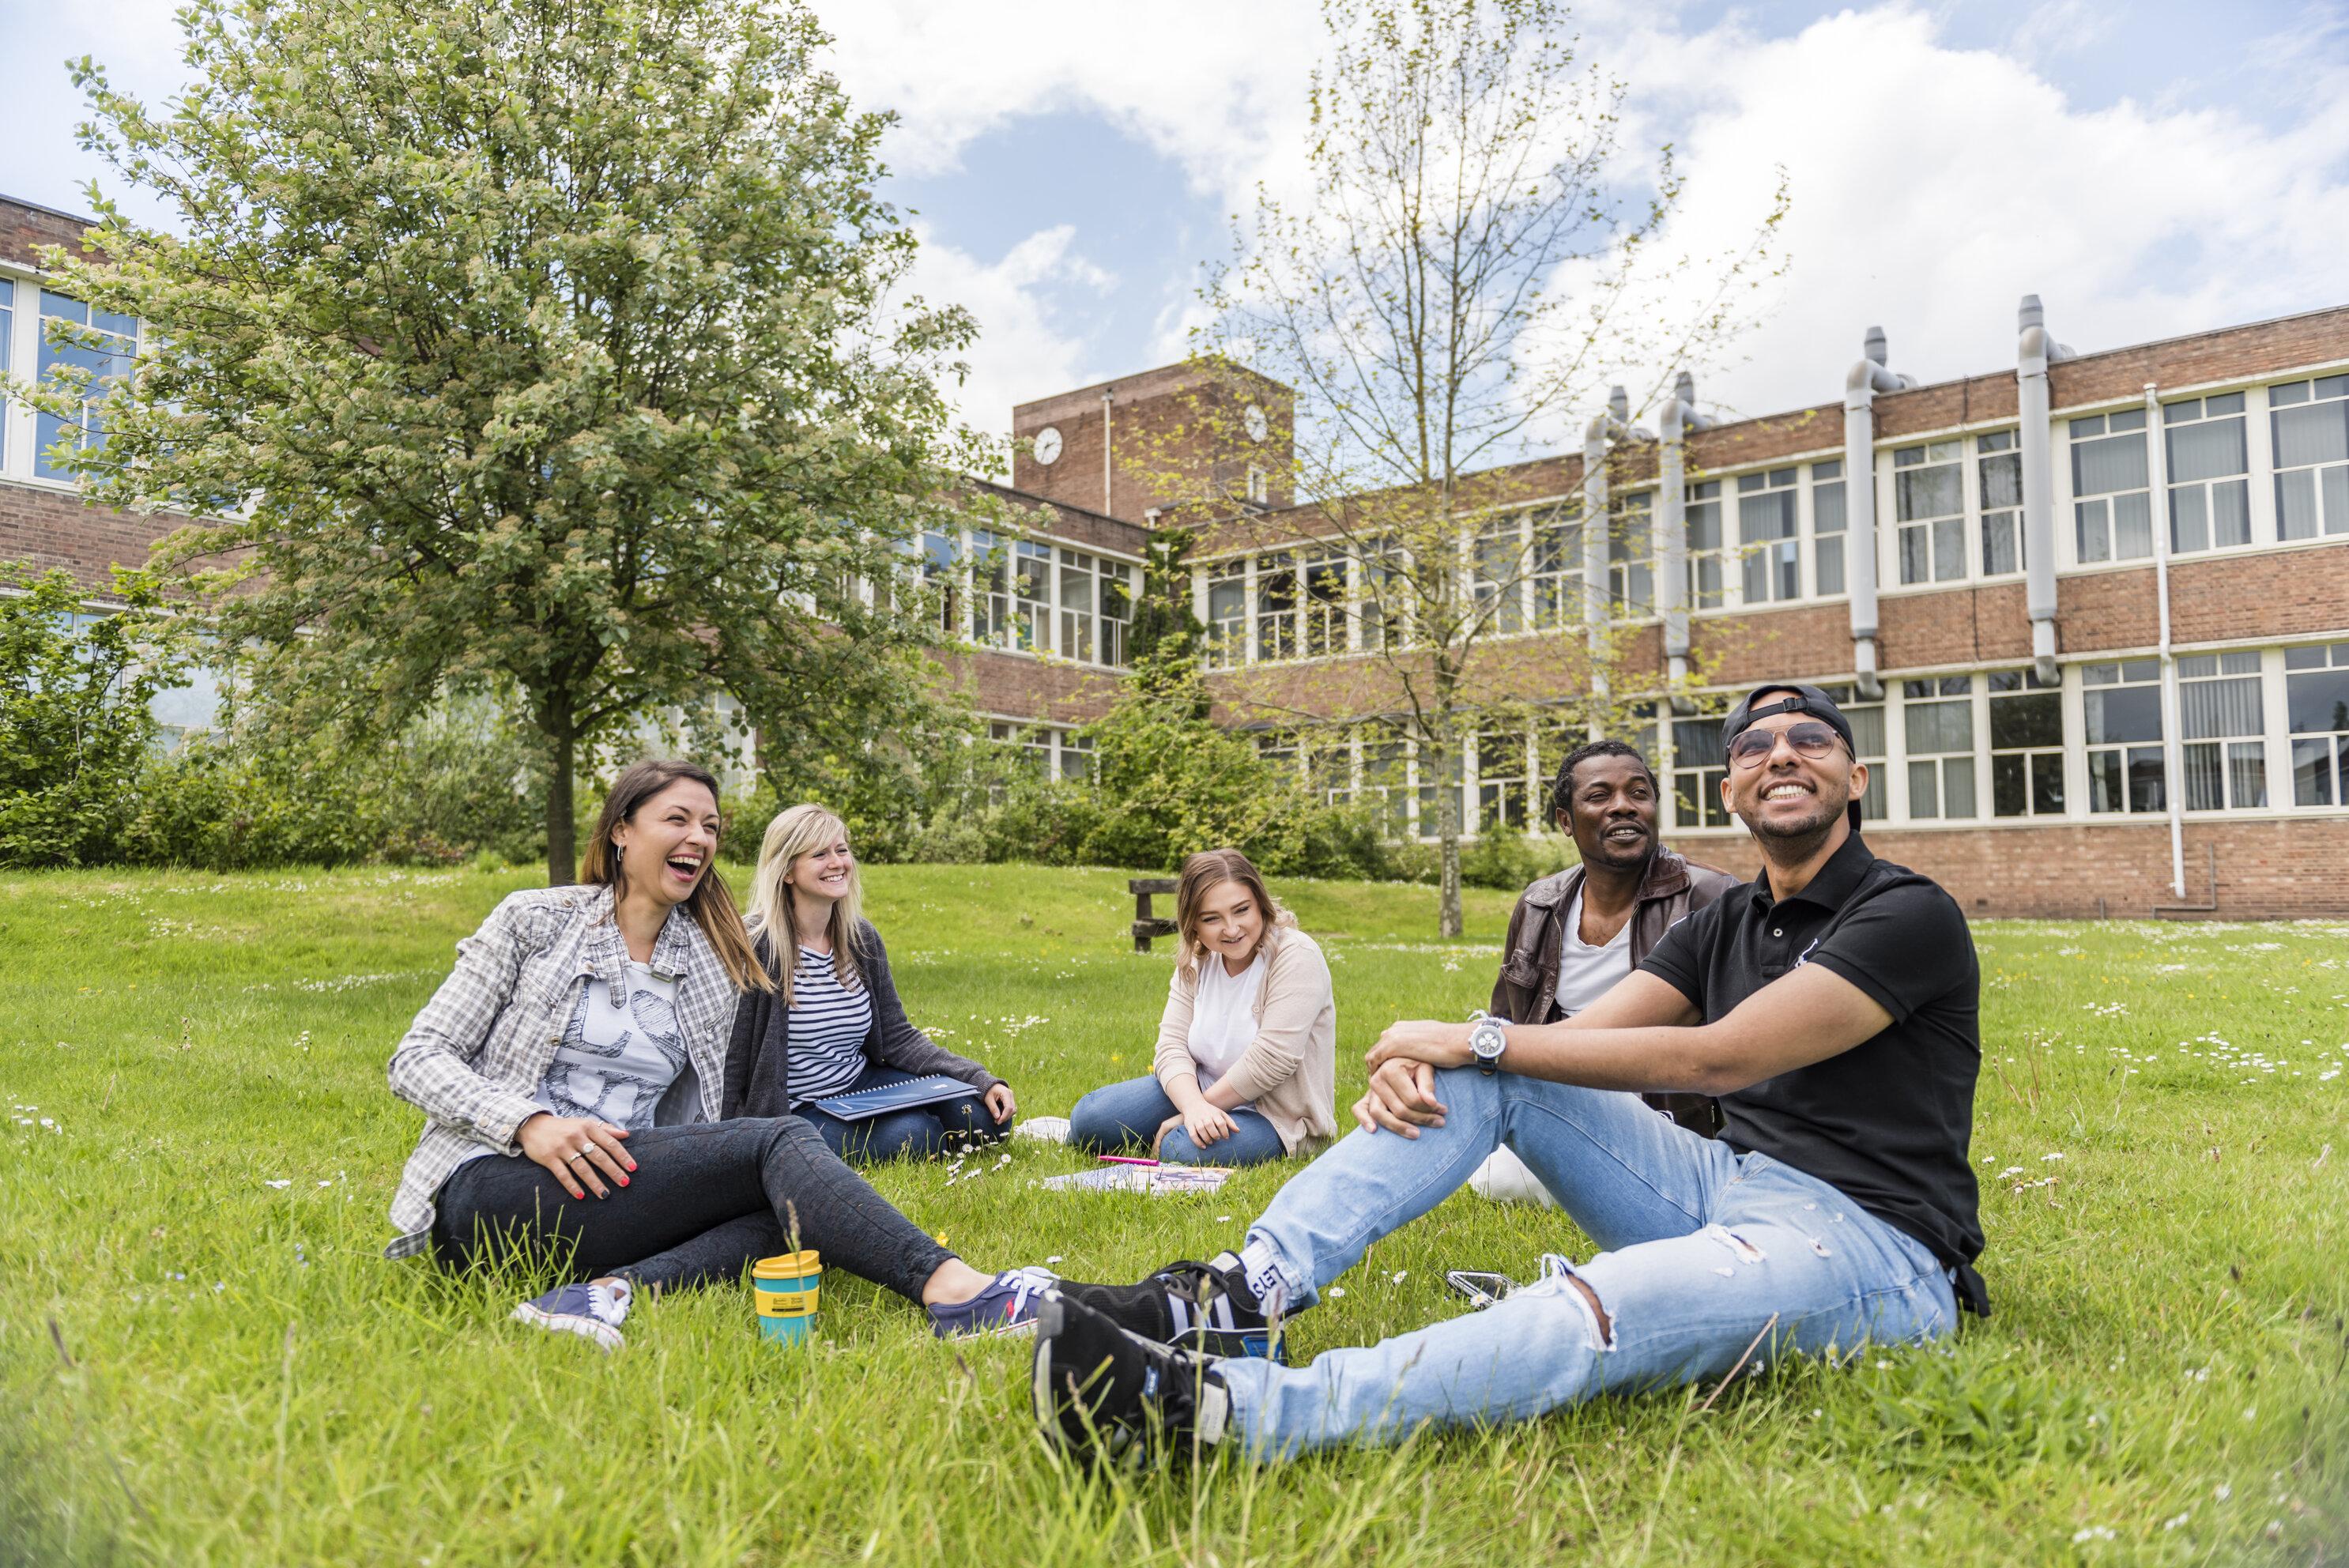 Three female and two male students sitting on a lawn outside a university building